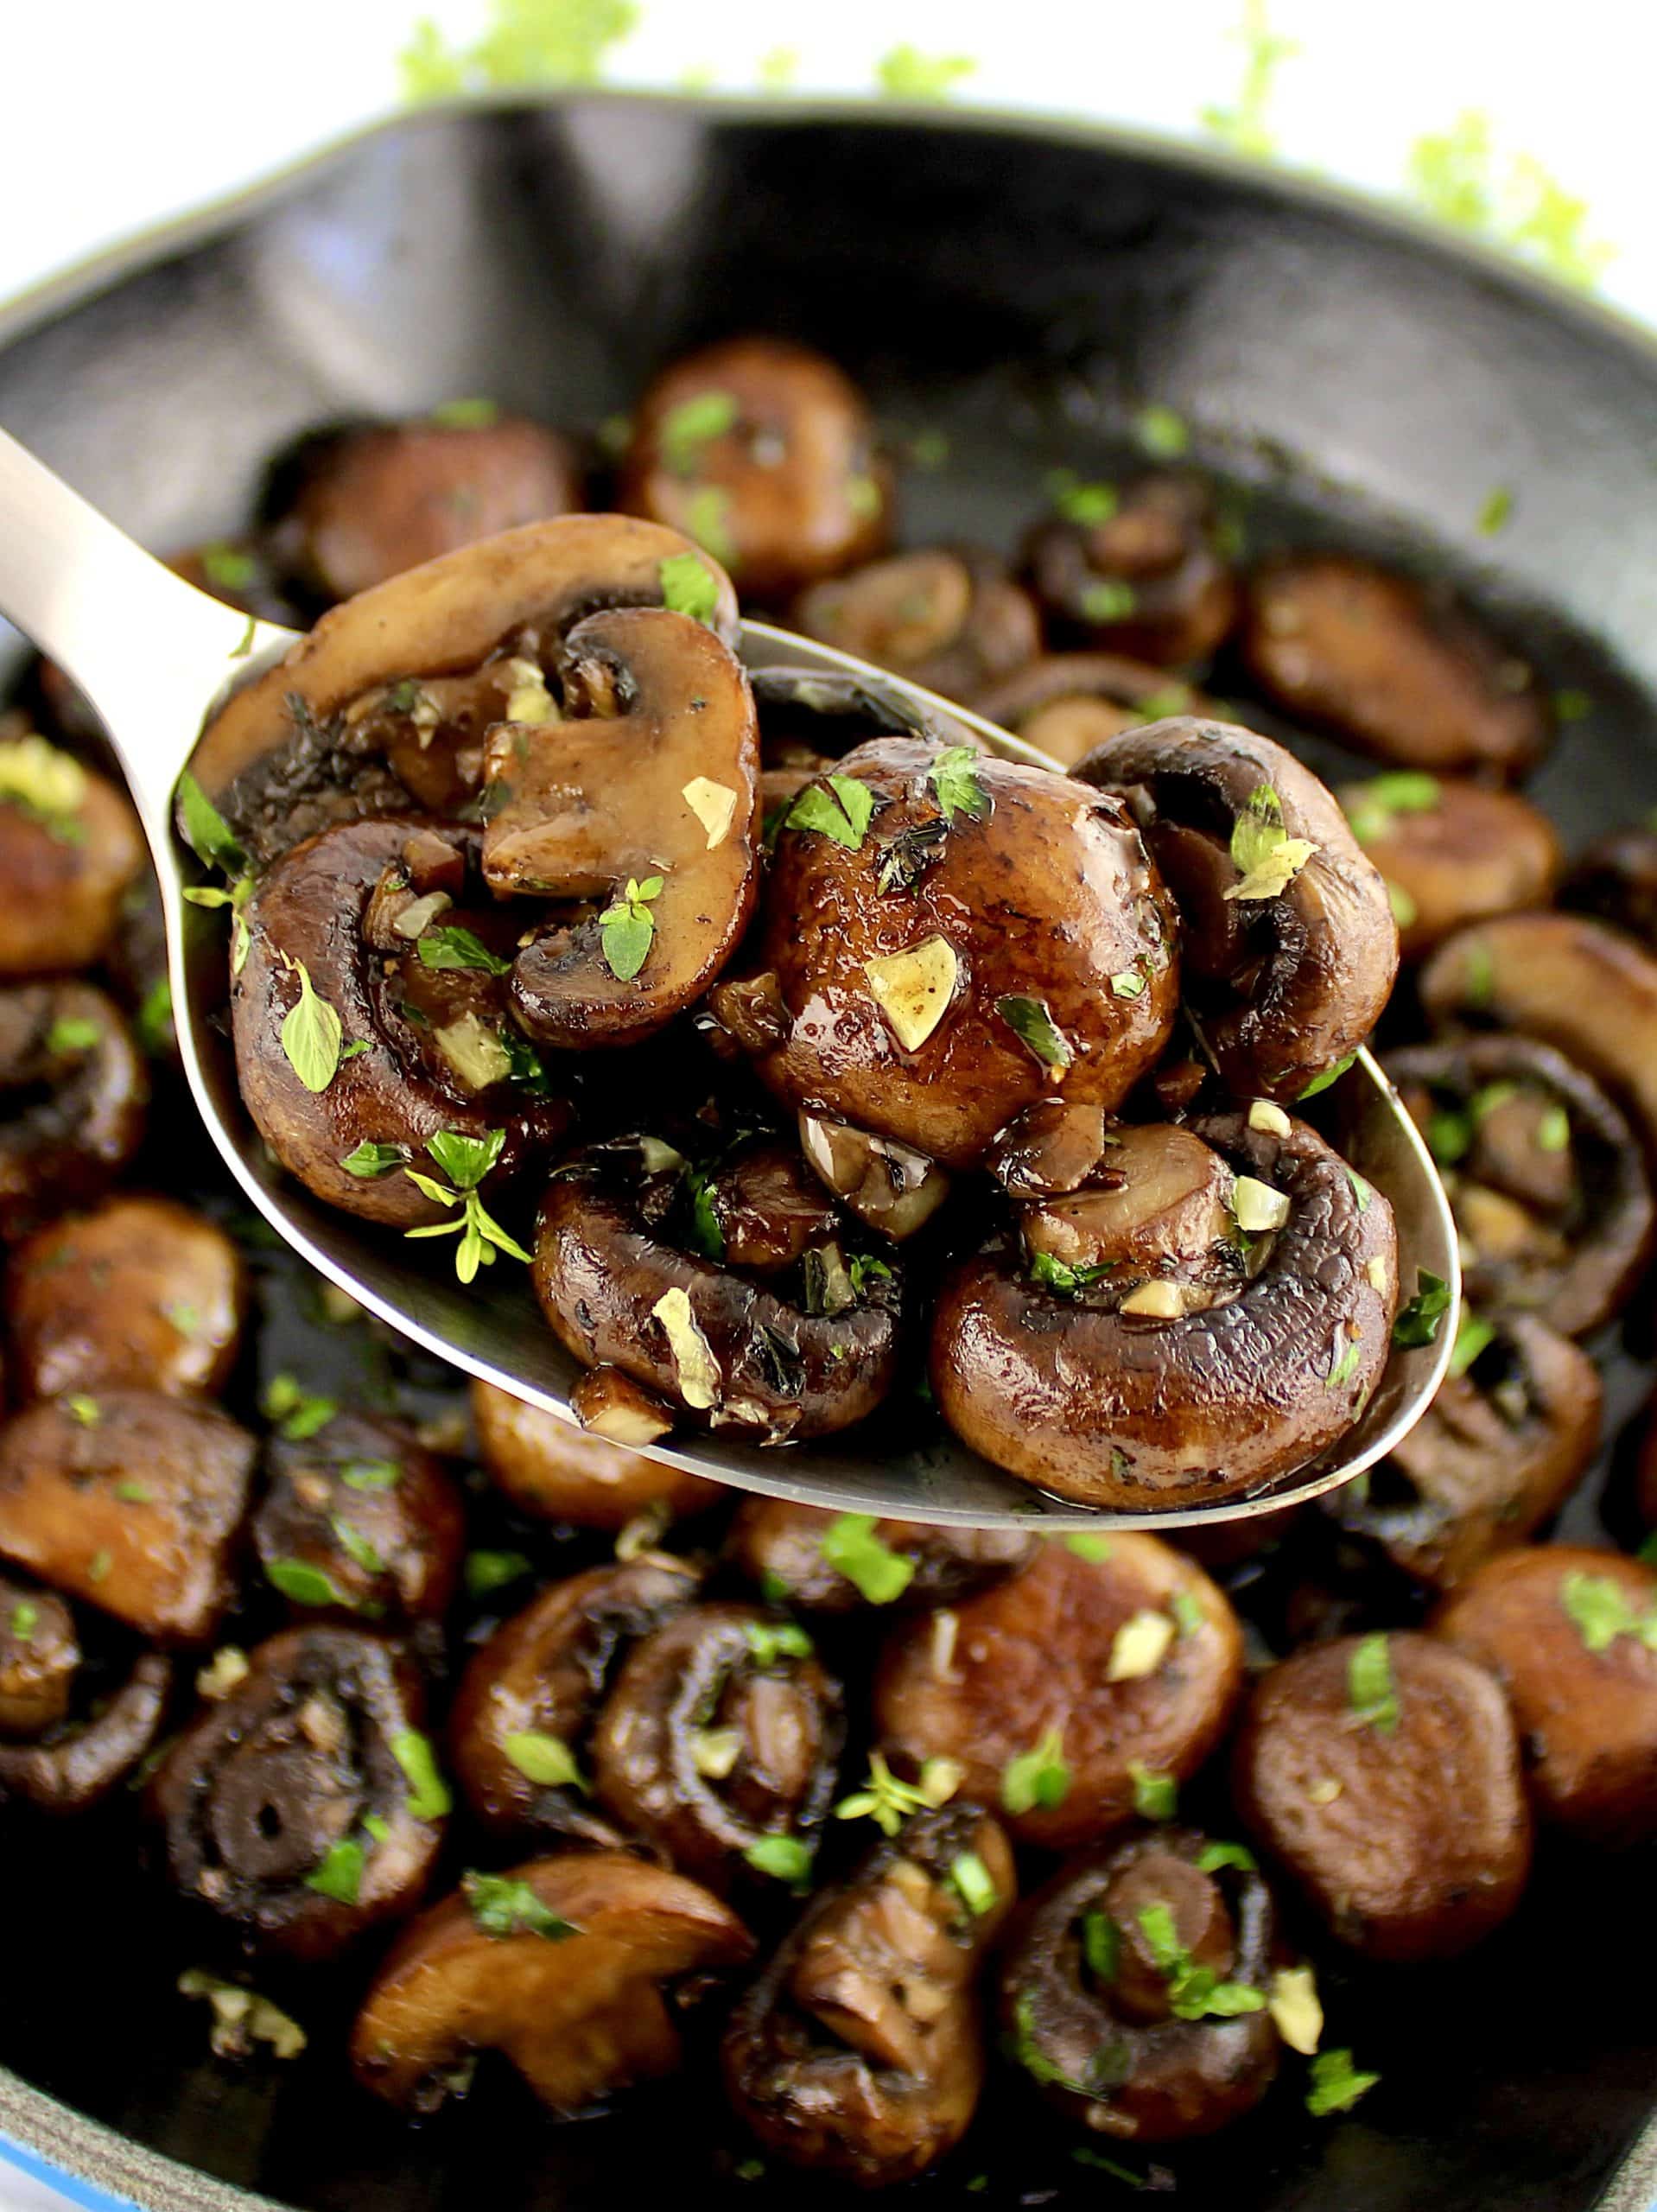 Sautéed Mushrooms in skillet with spoon holding up some